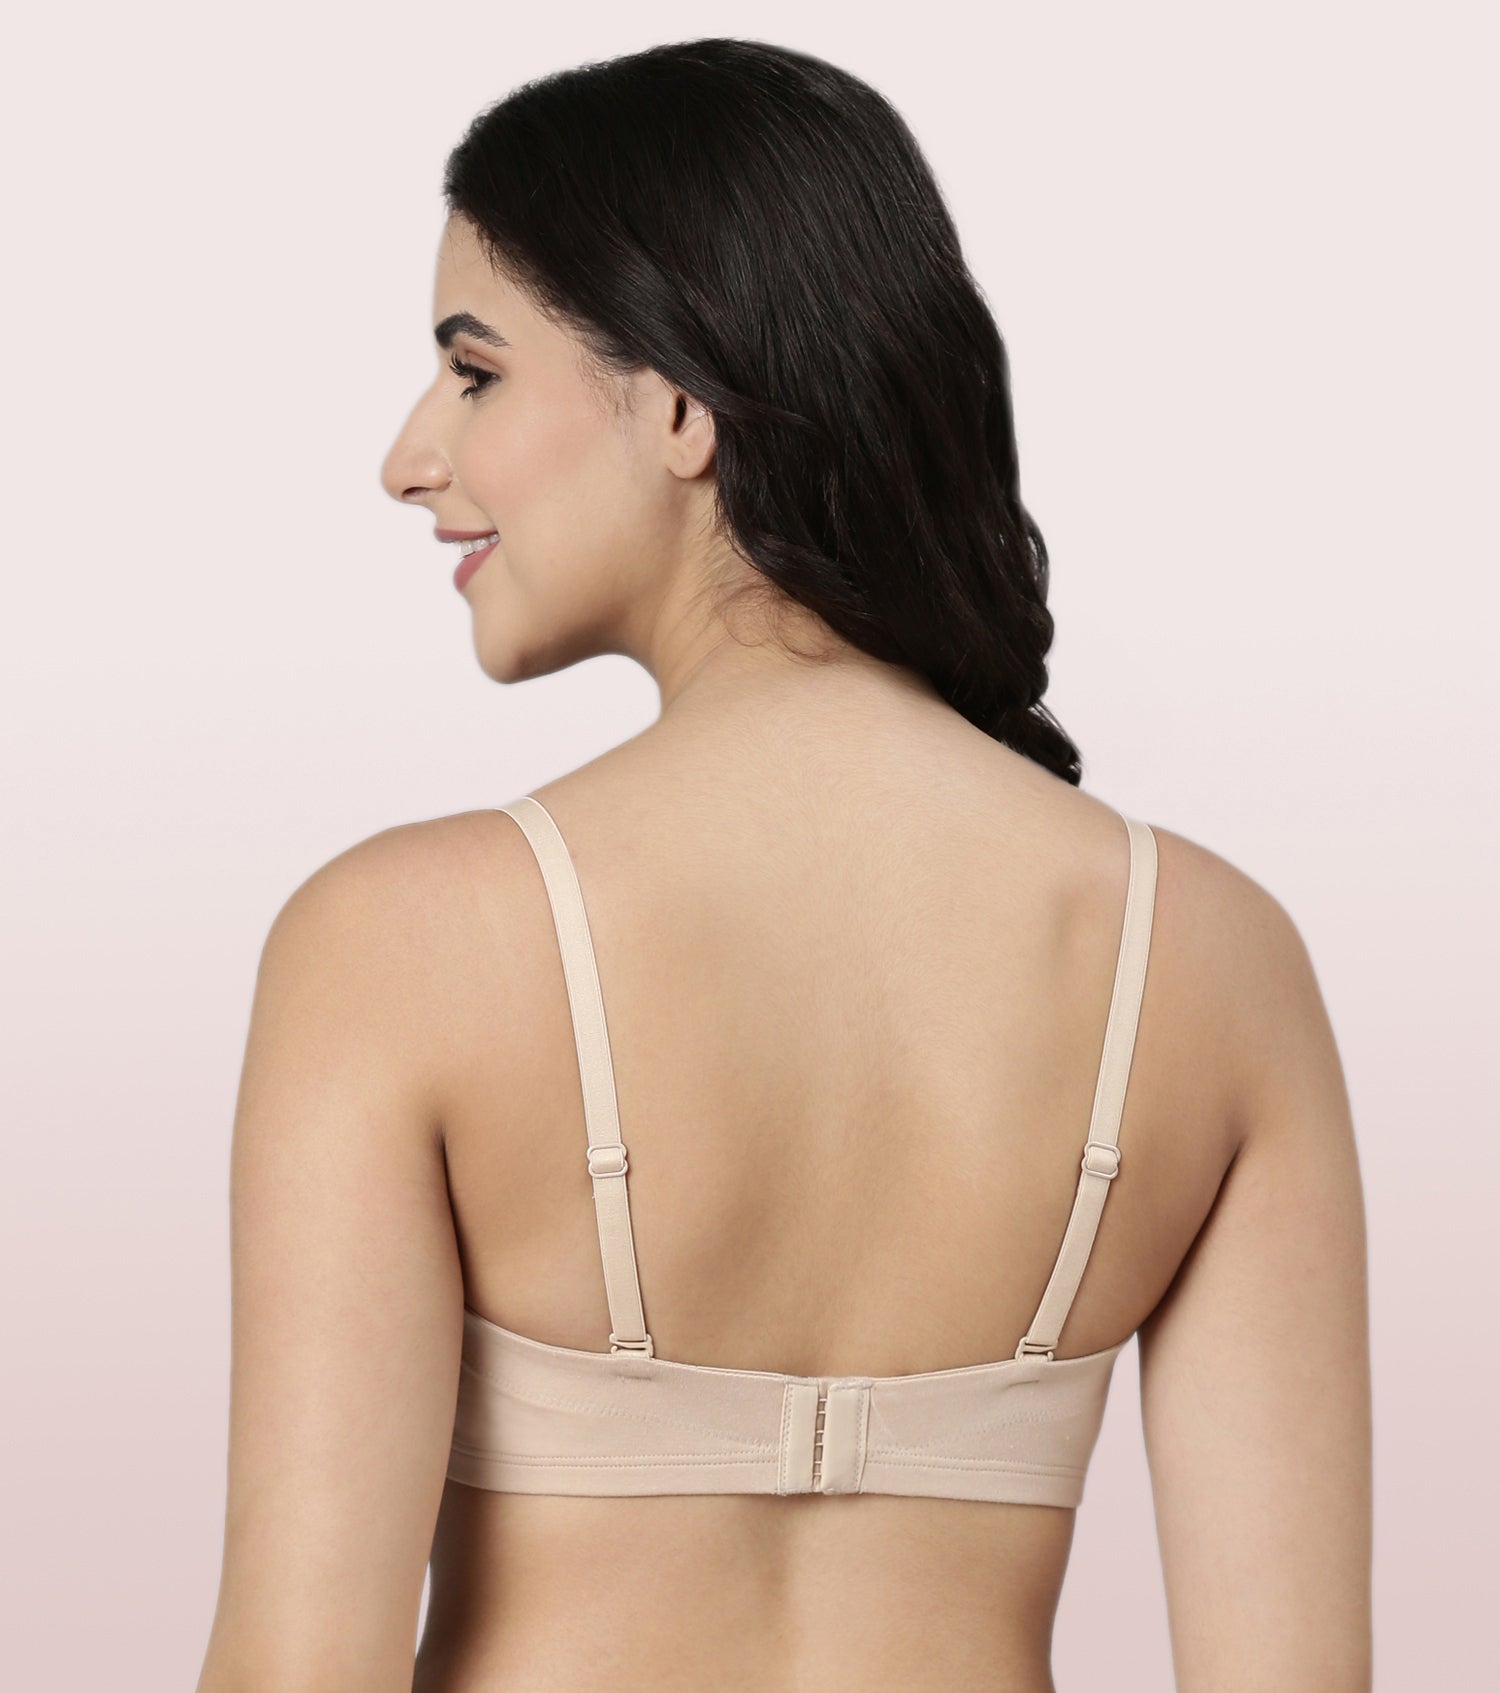 Enamor Multiway Bra For Women | High Coverage Cotton Strapless Bra For No Spill Coverage | A078Enamor Multiway Bra For Women | High Coverage Cotton Strapless Bra For No Spill Coverage | A078